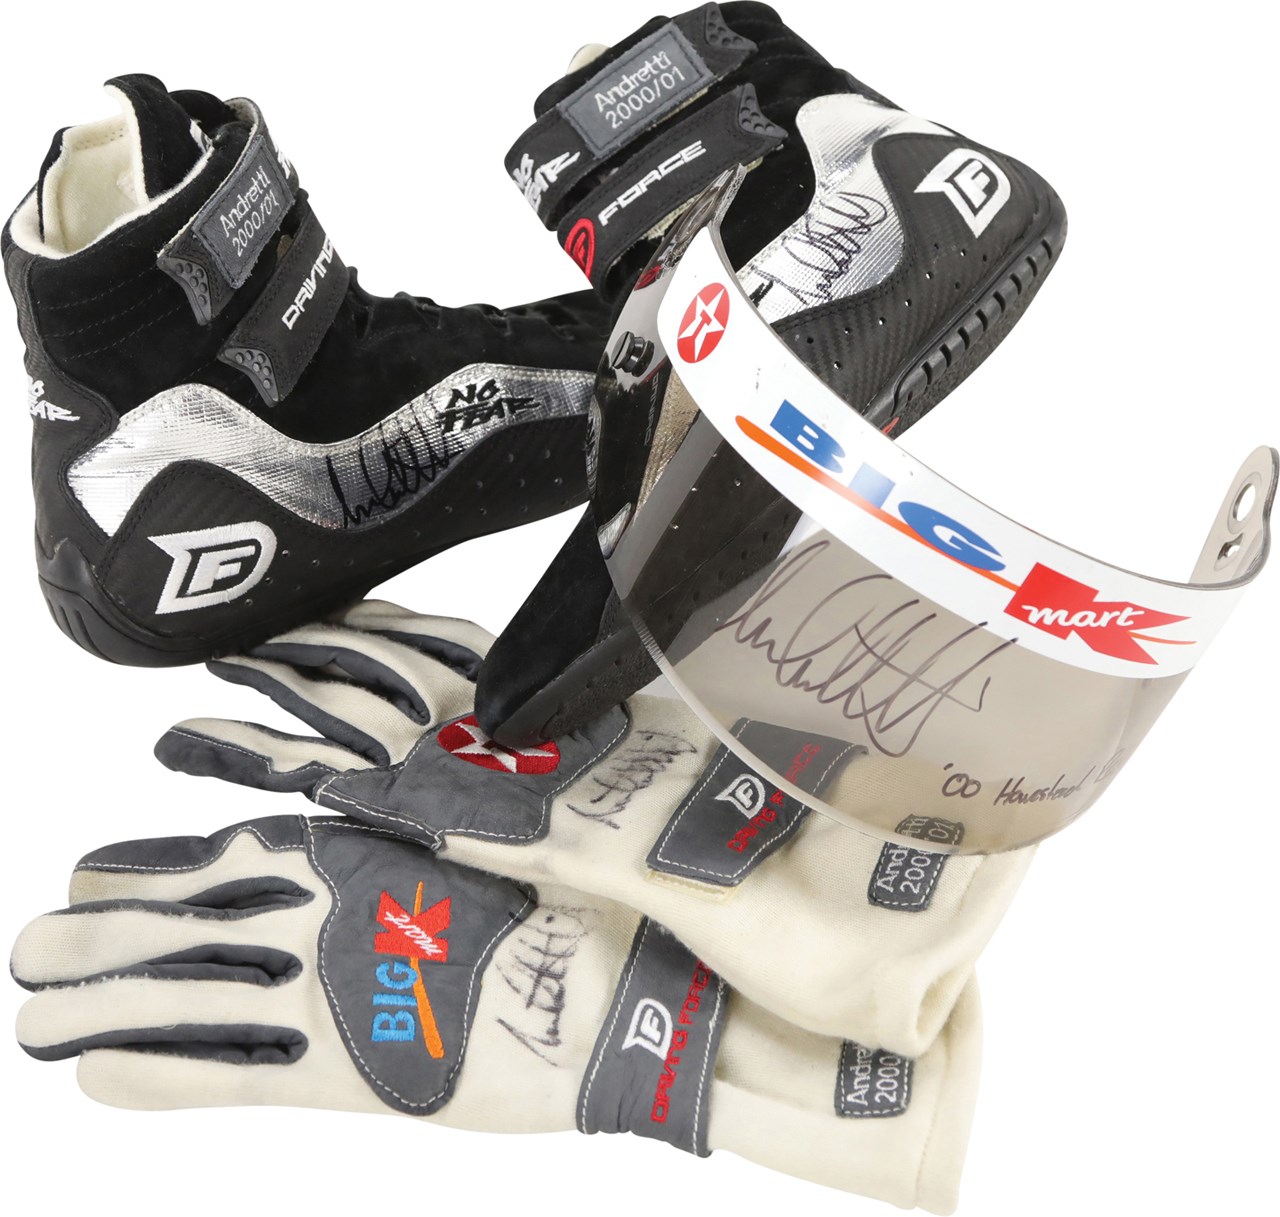 - 2000 Michael Andretti Race Used Gloves, Shoes, and Visor